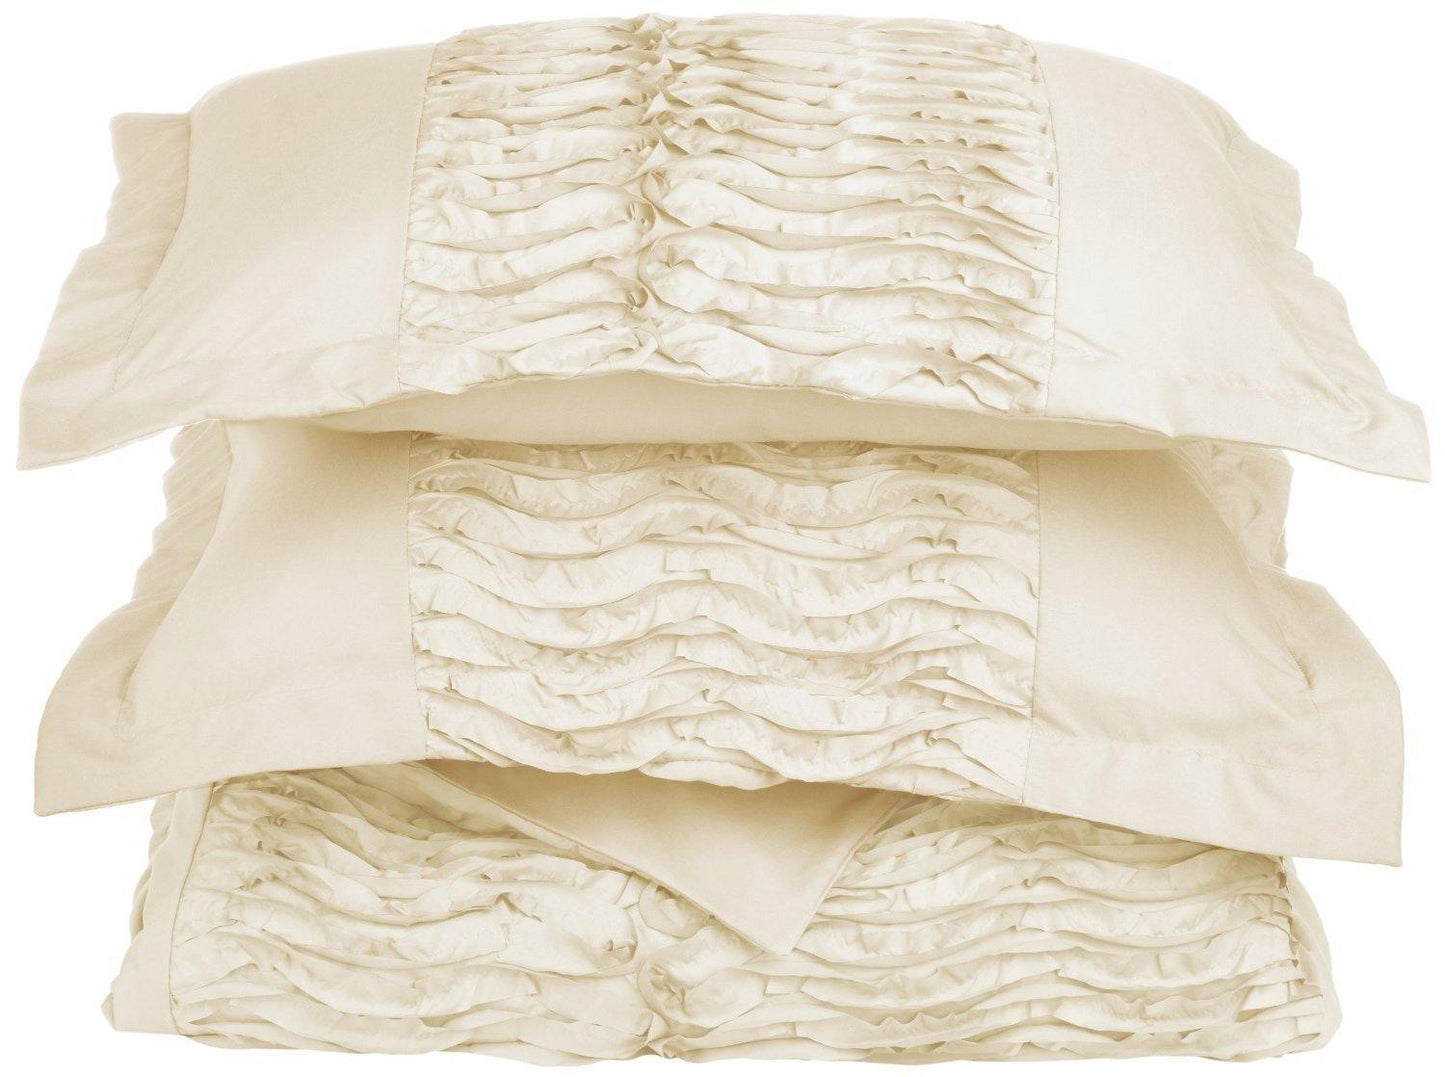 Neola Vintage Ruffled 3-Piece Duvet Cover and Pillow Sham Set FredCo